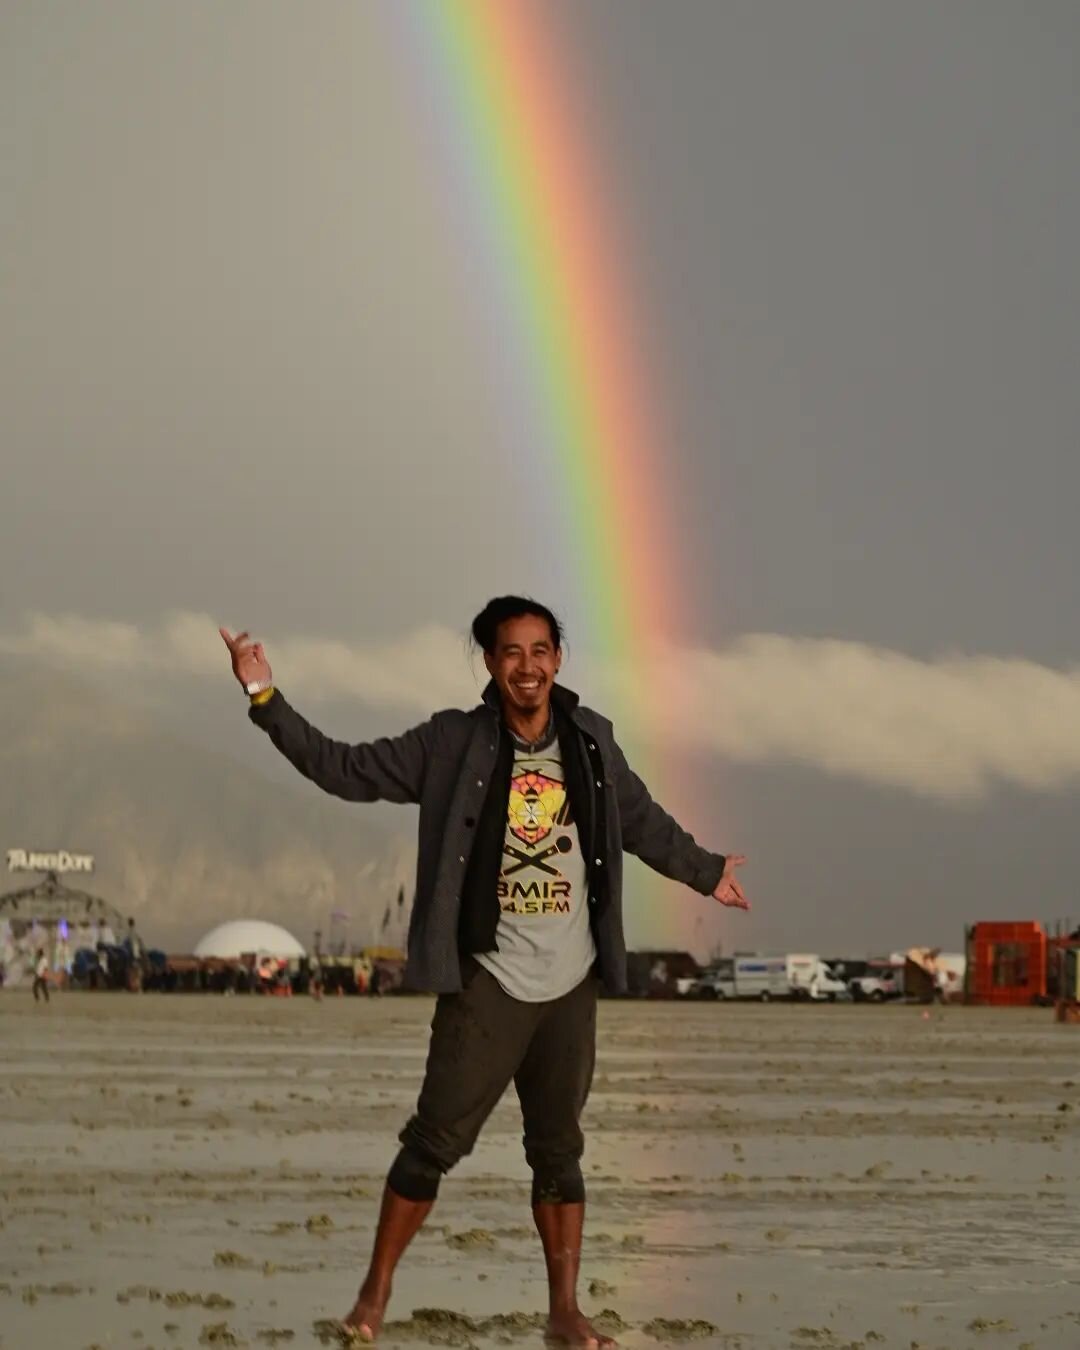 Meanwhile in Black Rock City...
Rain ☔, mud 😛, and double rainbow across the sky! 🌈🌈 

No cars &amp; bicycles.
Magnificent sunset. 
Few people out &amp; about. 
Reflections across the Playa.
No matter how grand our plans &amp; intentions, 
In the 